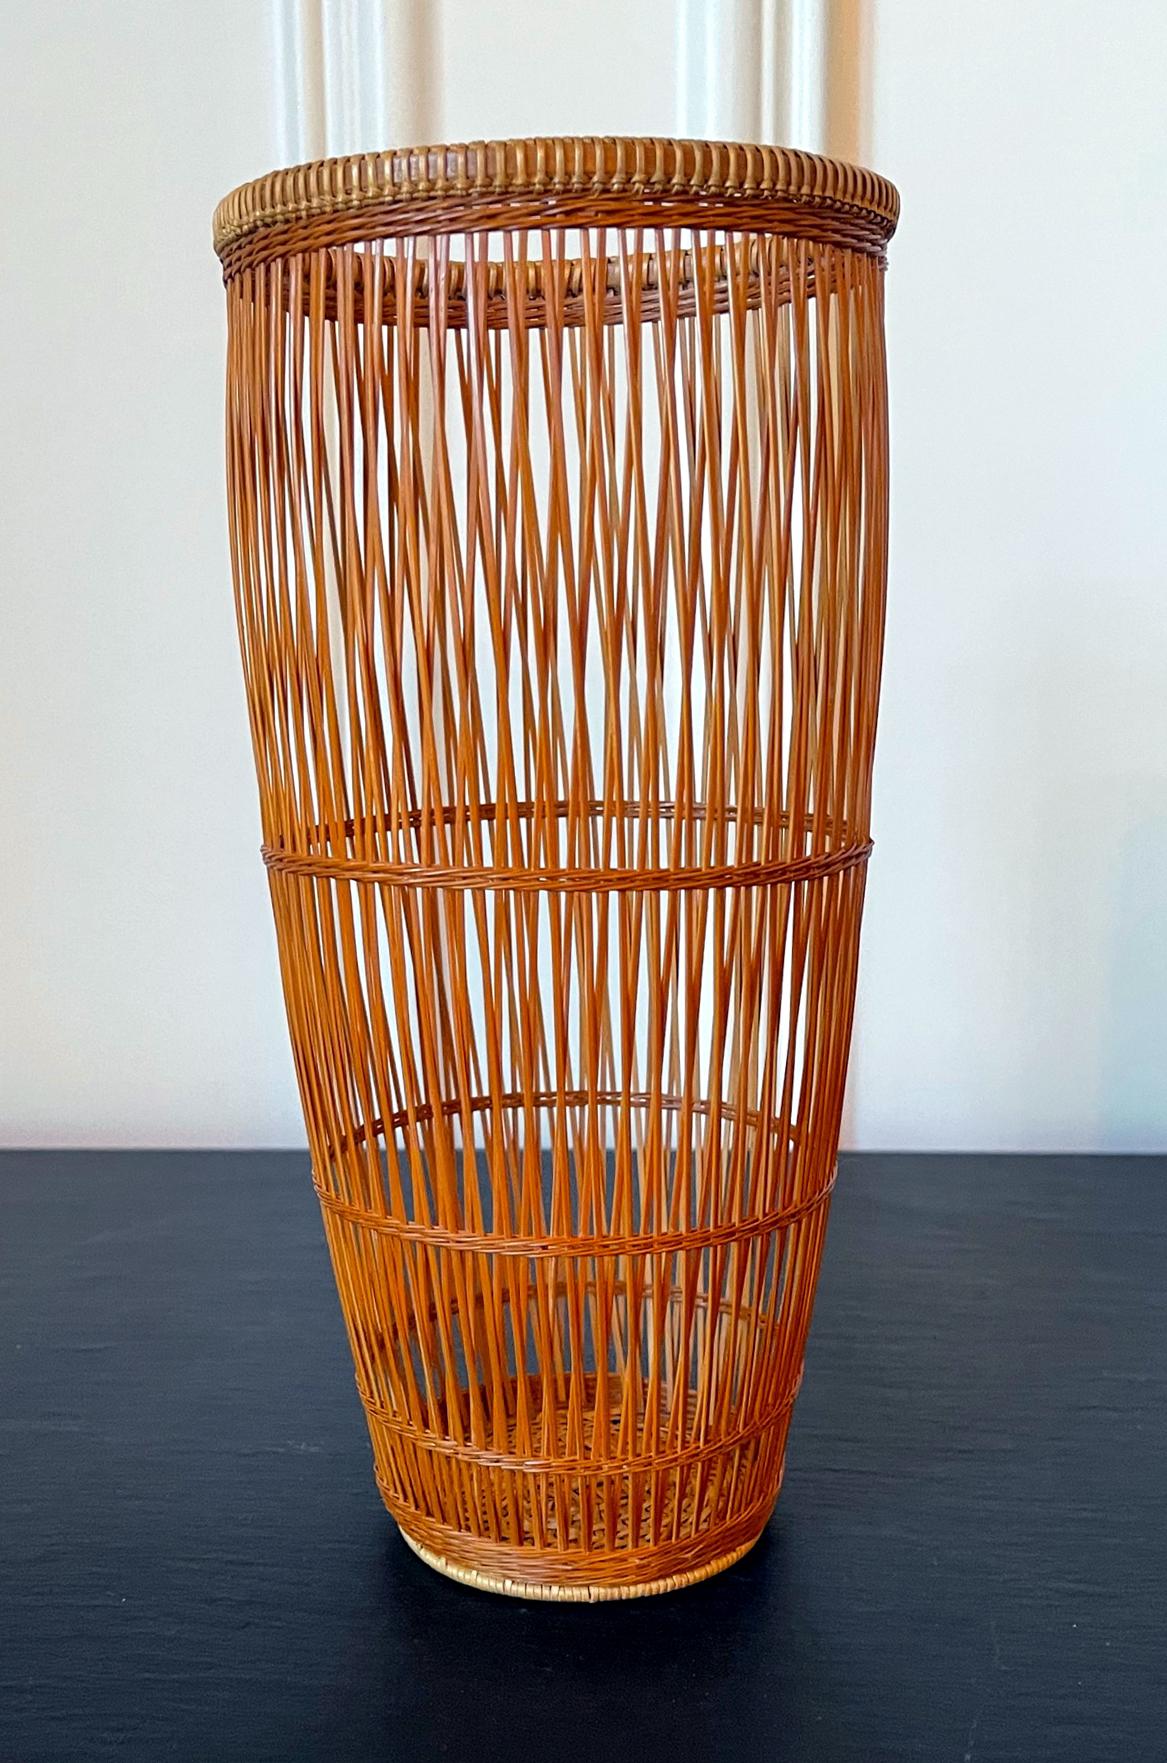 A Japanese Ikebana basket woven by bamboo artist Abe Motoshi (Japanese, b. 1942). Constructed with Madake bamboo and rattan with technique of open twinning and crossed variation of thousand-line, the basket features the Ayagake pattern, which are